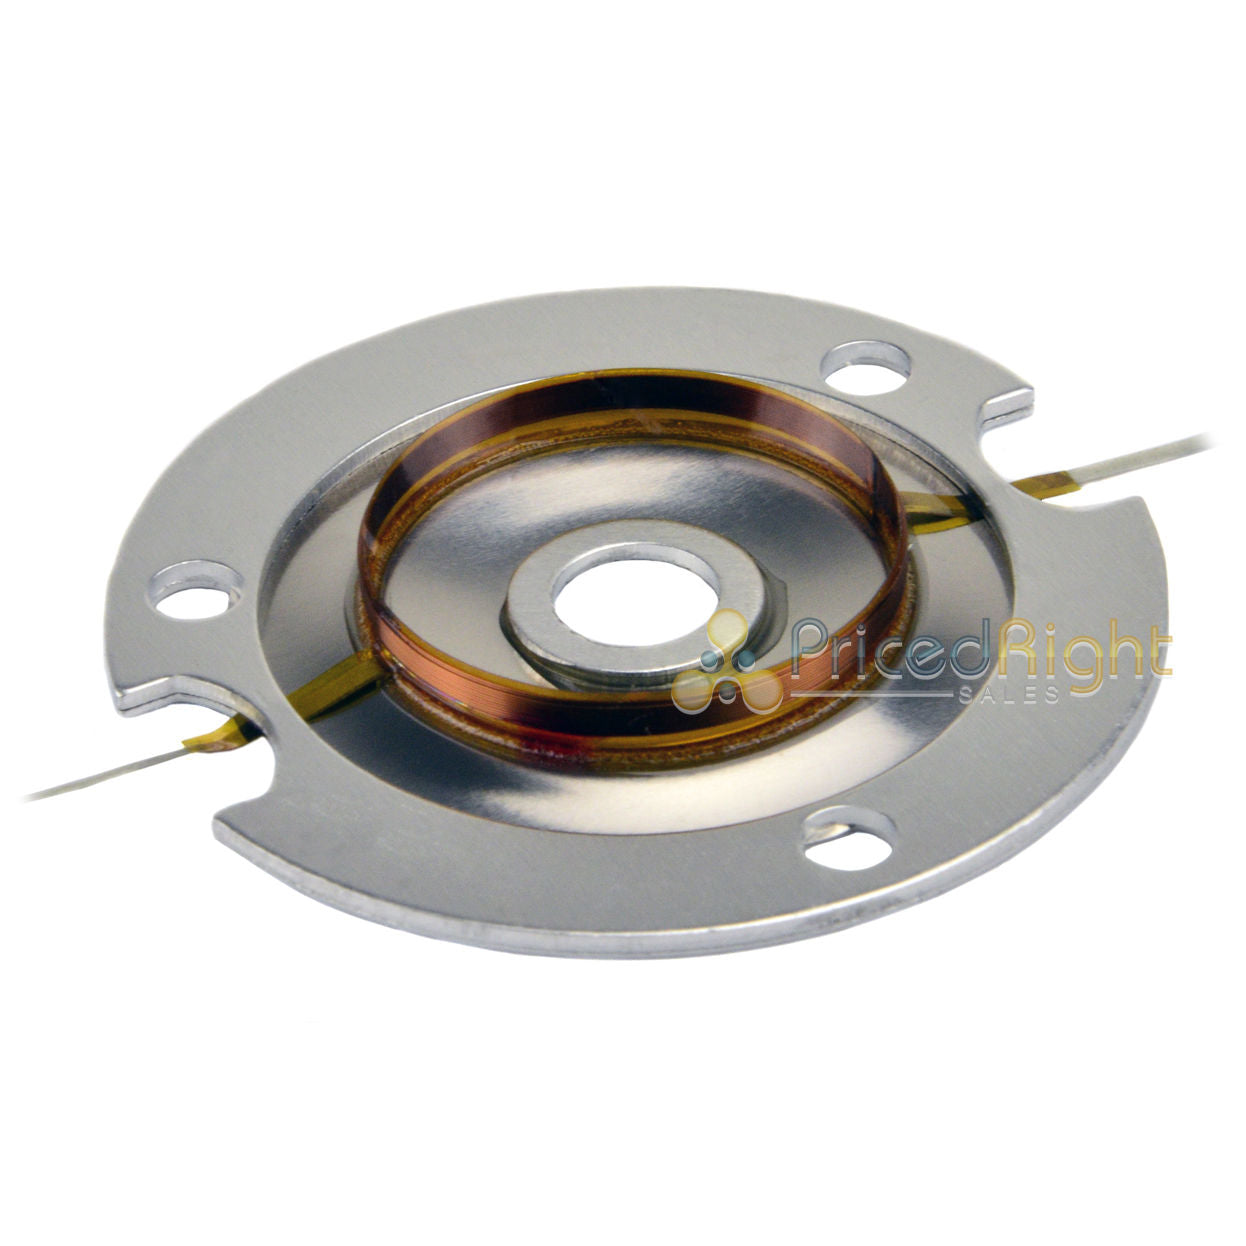 1 ATQ-1550 Tweeter Replacement Voice Coil for Tweeter ATQVC-1551 Recone Kit